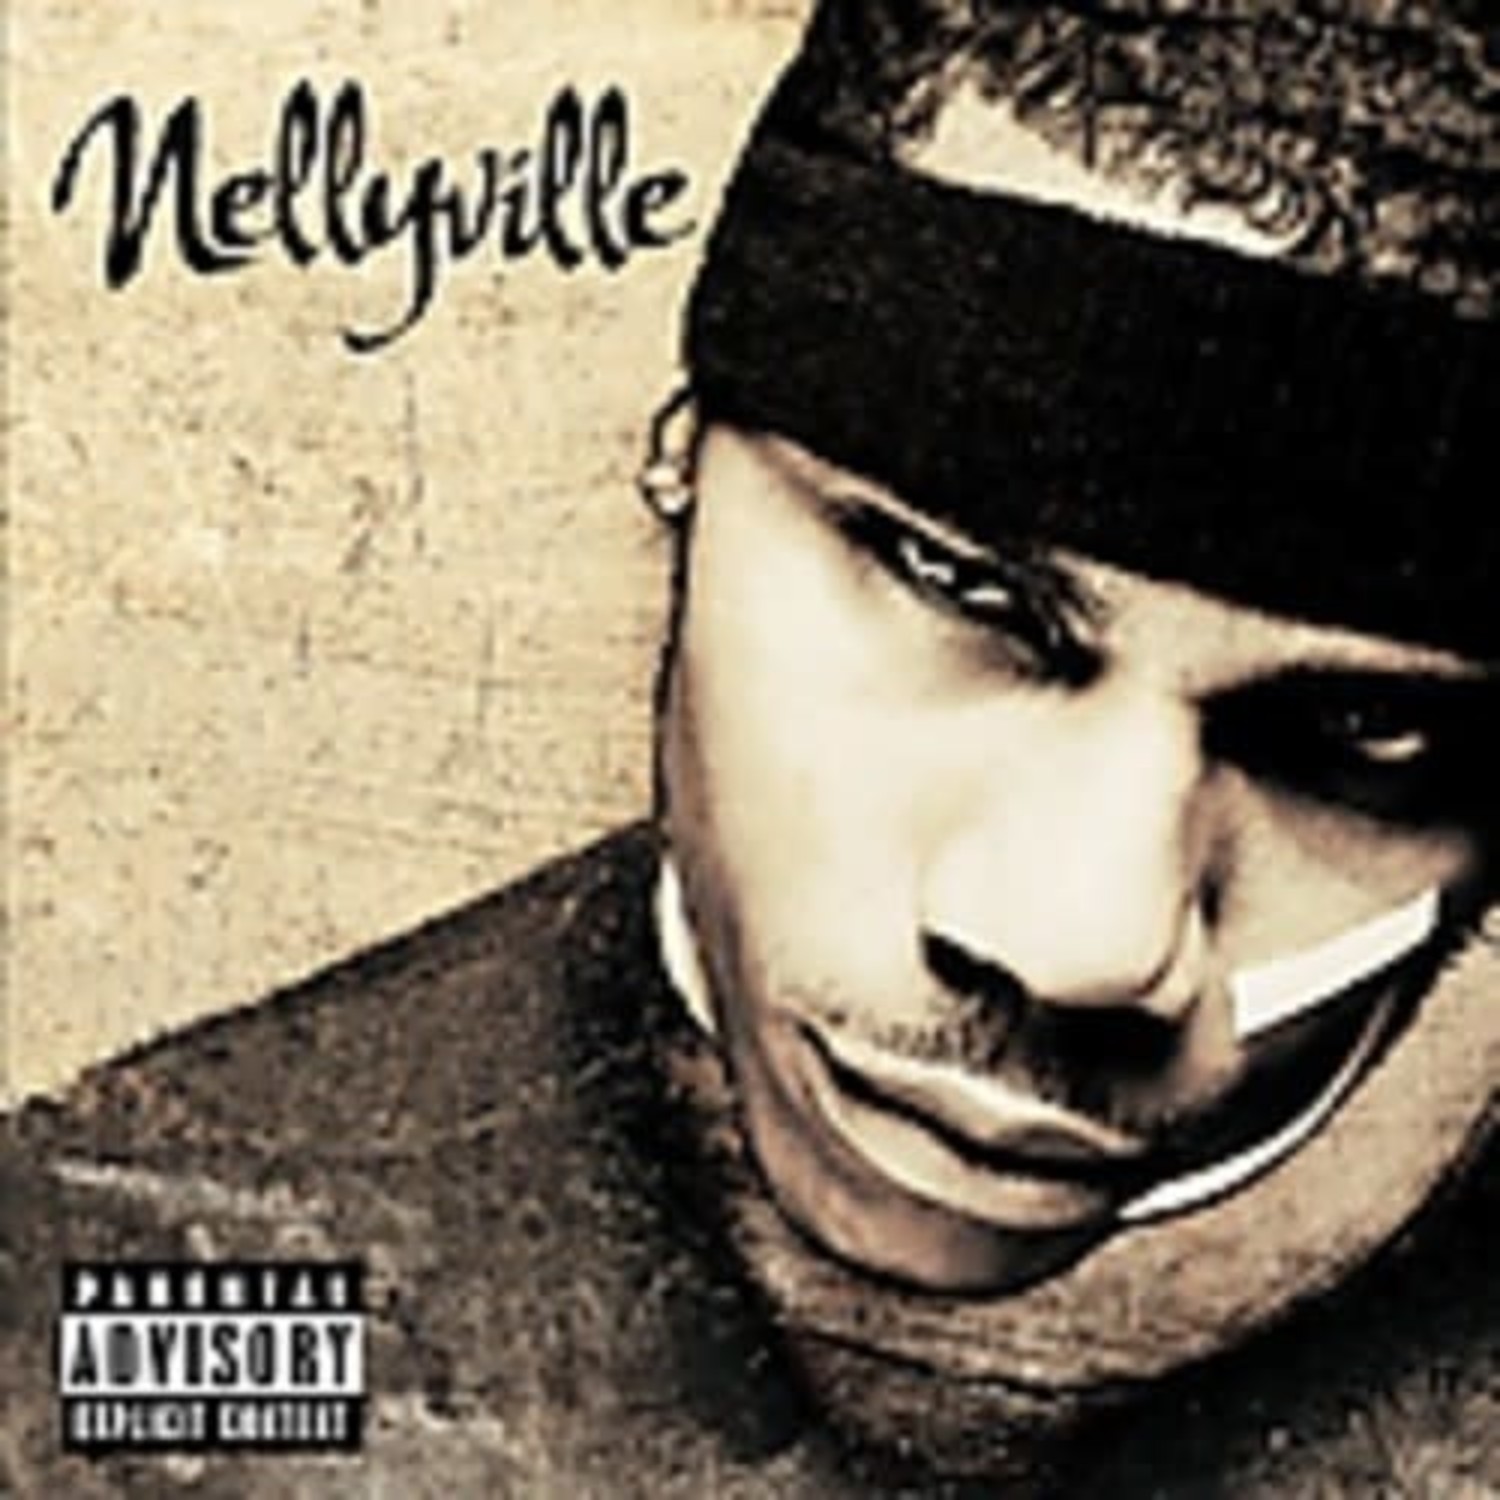 Nelly - Nellyville LP (reissue) - Wax Trax Records